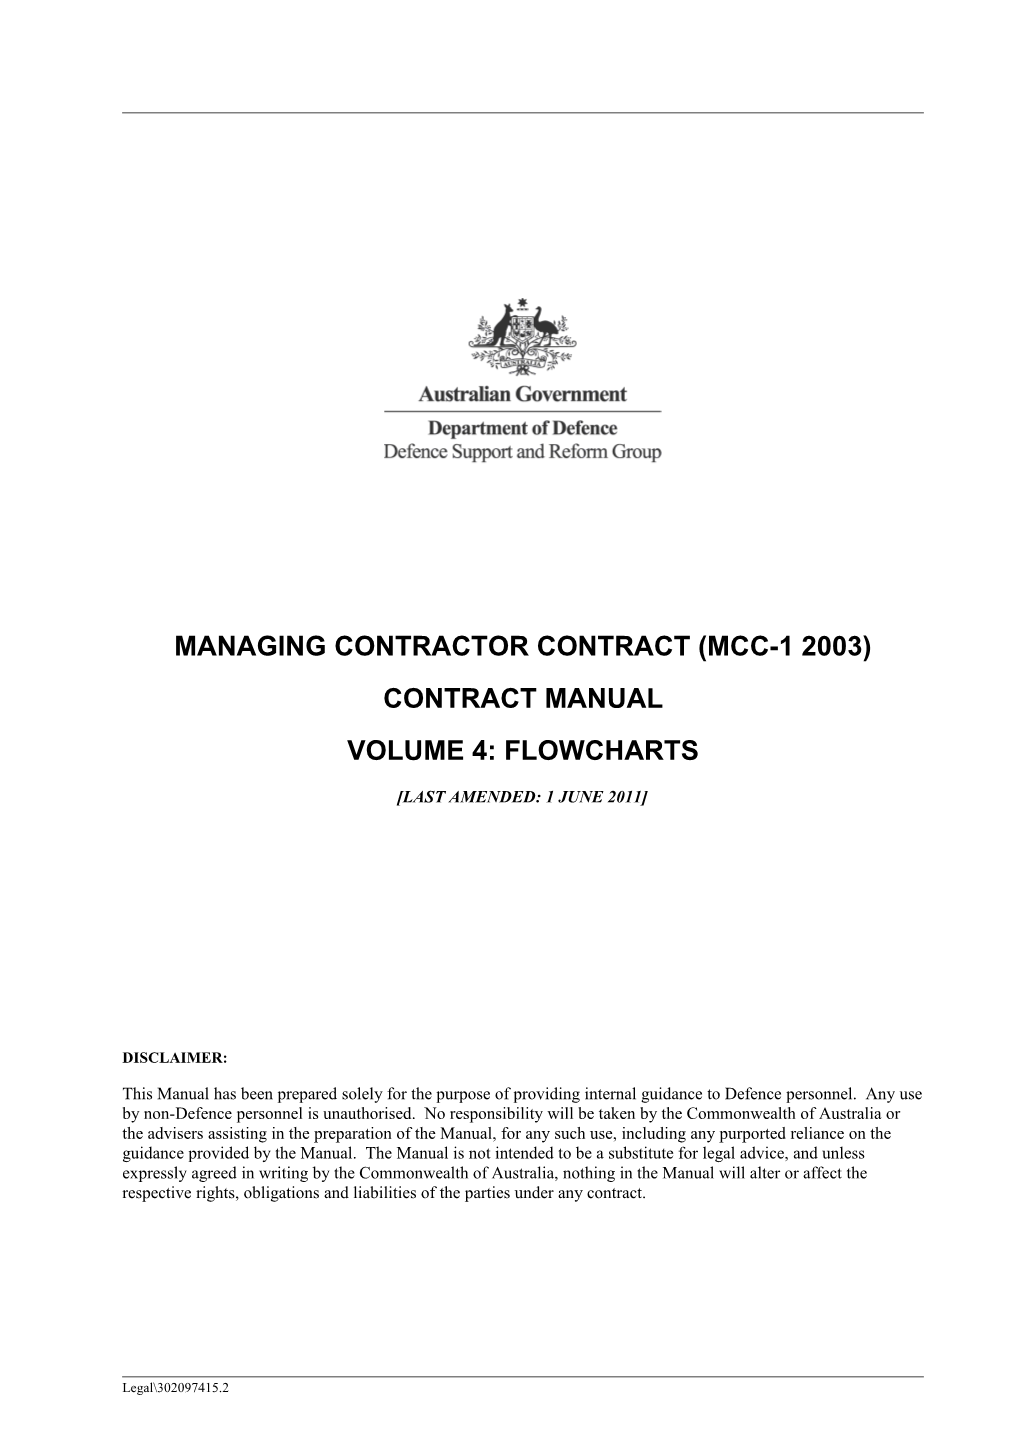 Managing Contractor Contract (Mcc-1 2003)